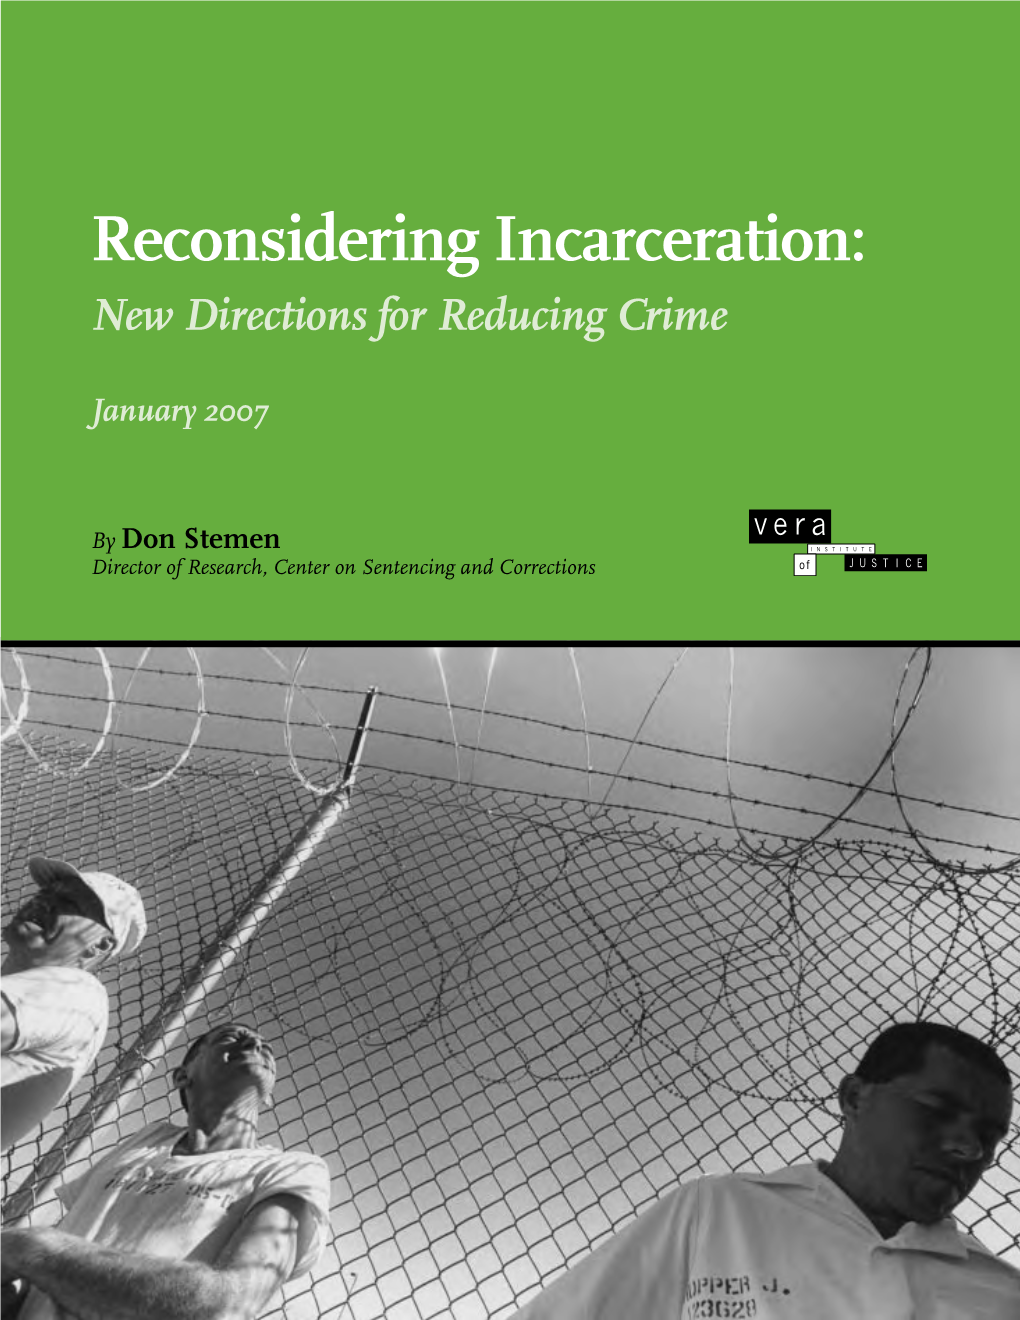 Reconsidering Incarceration: New Directions for Reducing Crime